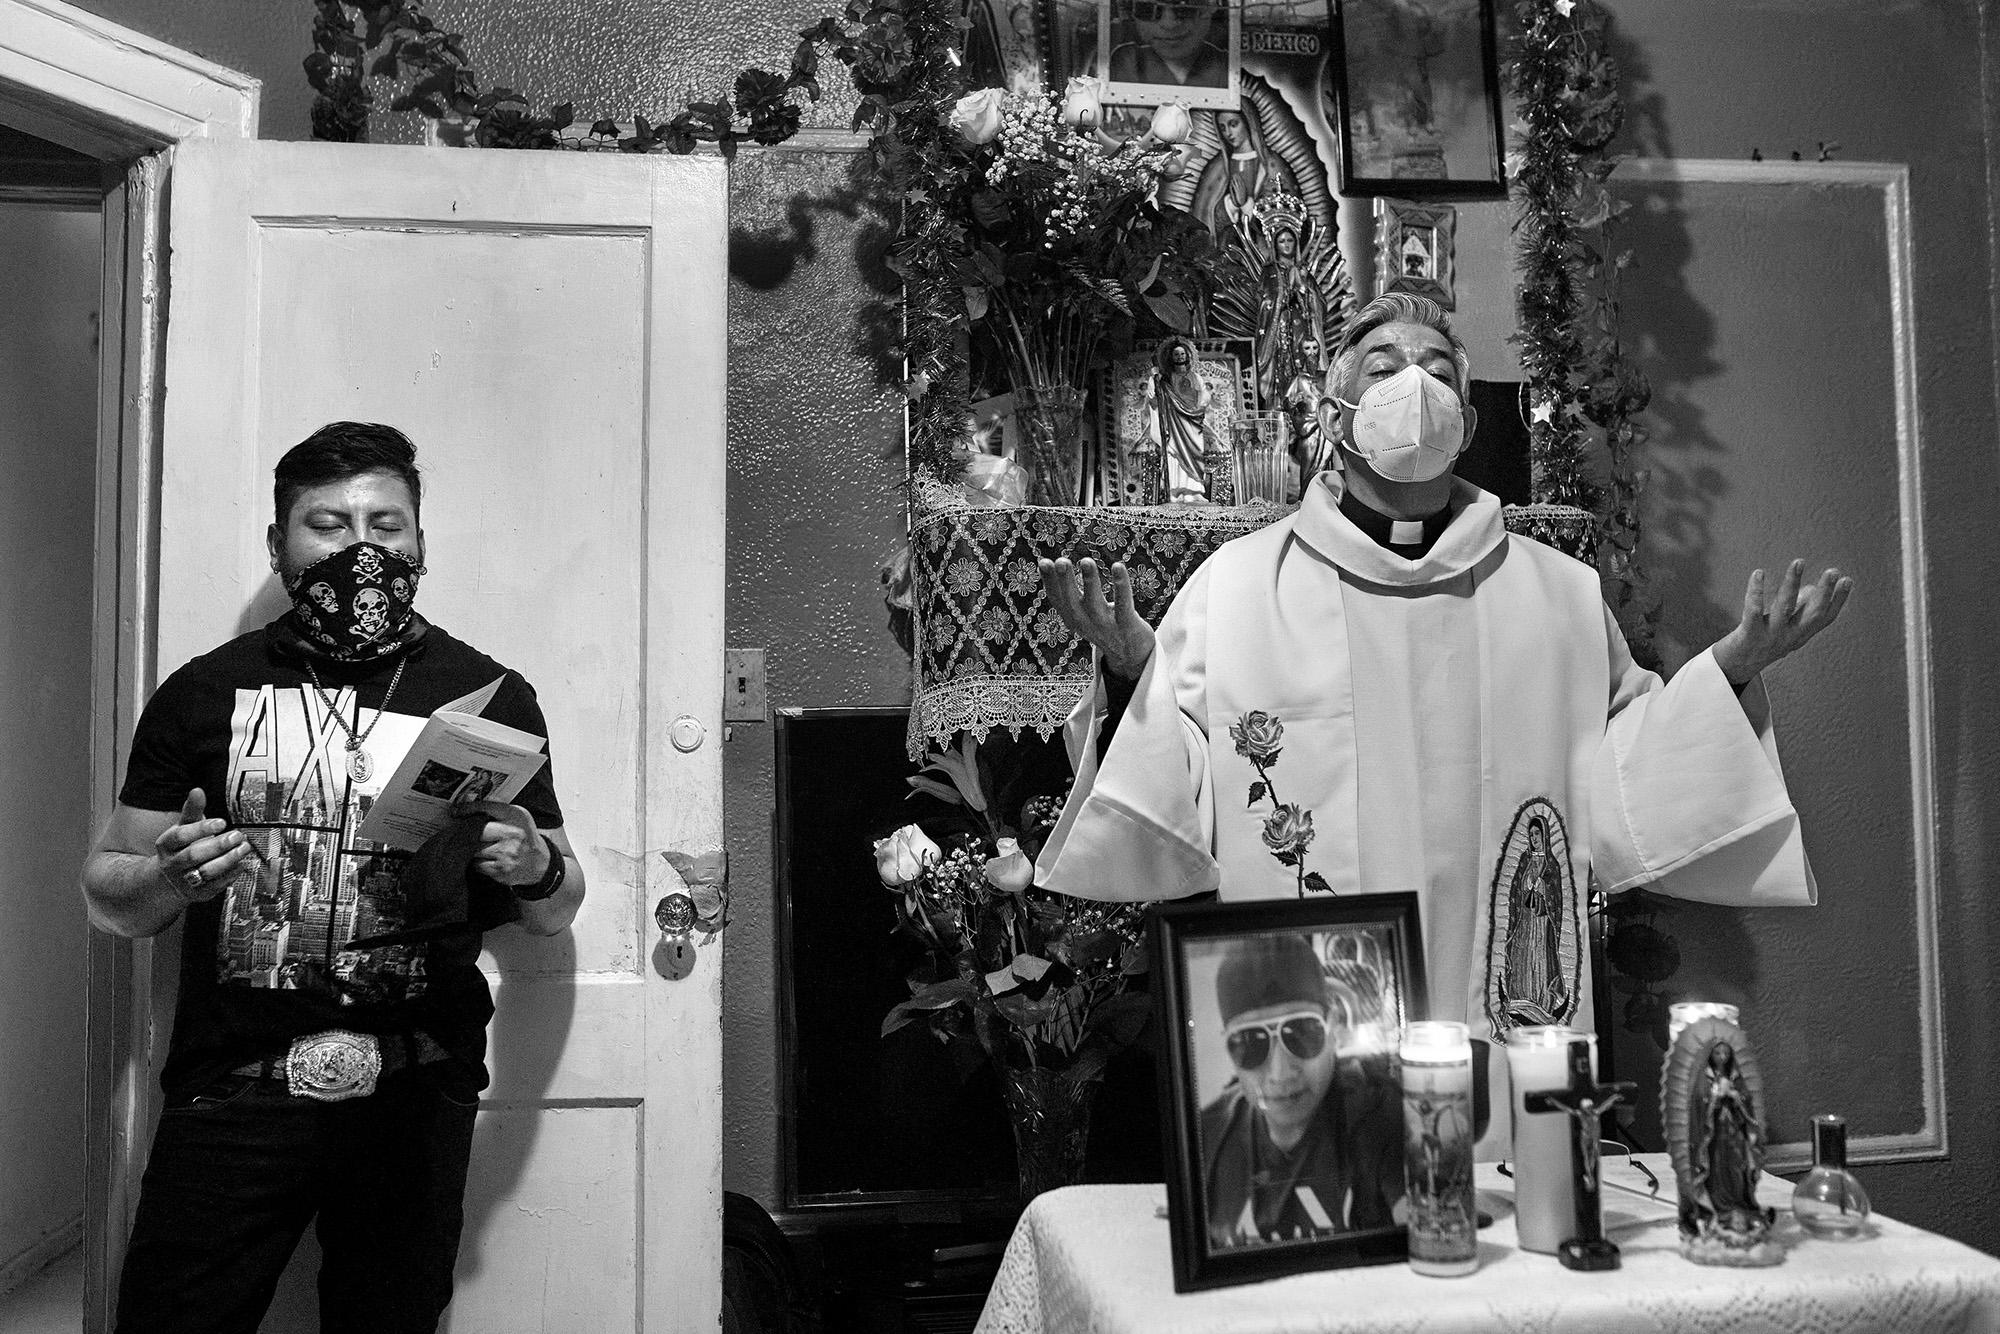 Padre Fabián Arias, an Argentine priest who serves New York’s Latino communities, officiates Mass in memory of Raúl Luis López, a Mexican migrant who died in New York from Covid-19 in April 2020, at the age of 39. Photo: Edu Ponces/Ruido Photo